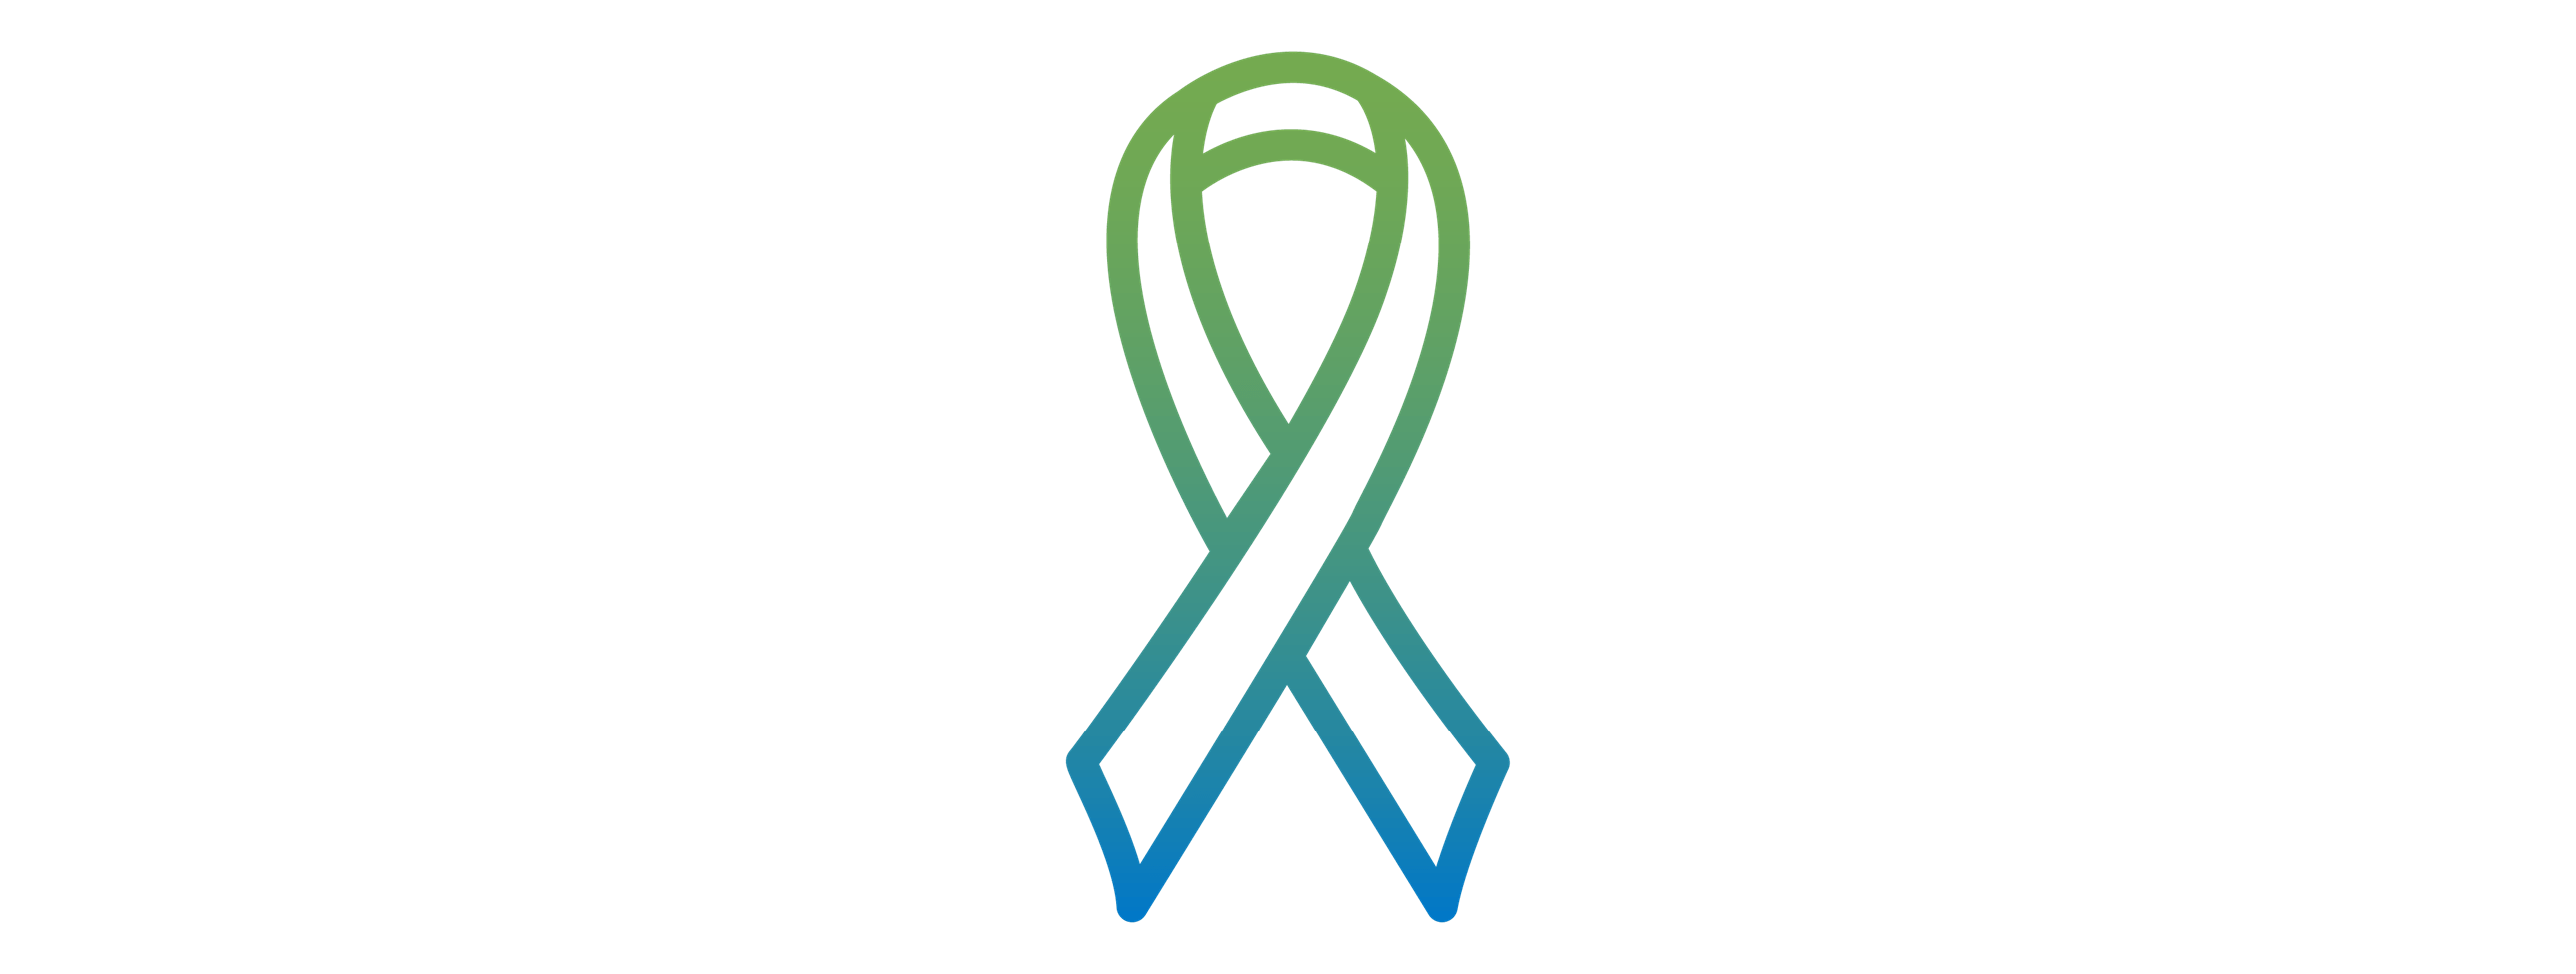 cancer awareness ribbon icon for oncology